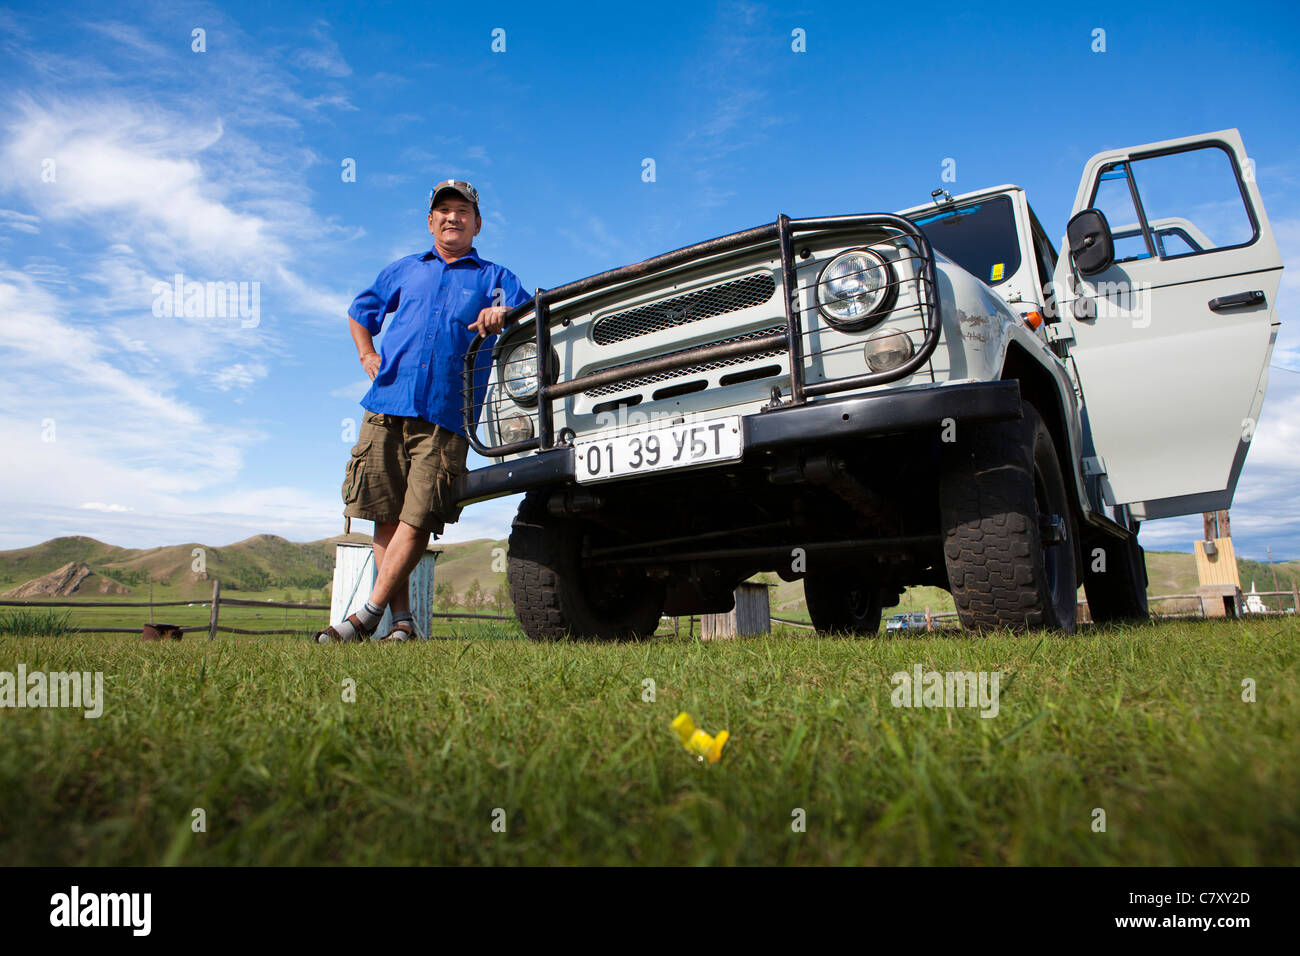 Russian jeep UAZ-469 with owner in Mongolia on steppe, Mongolia. Stock Photo